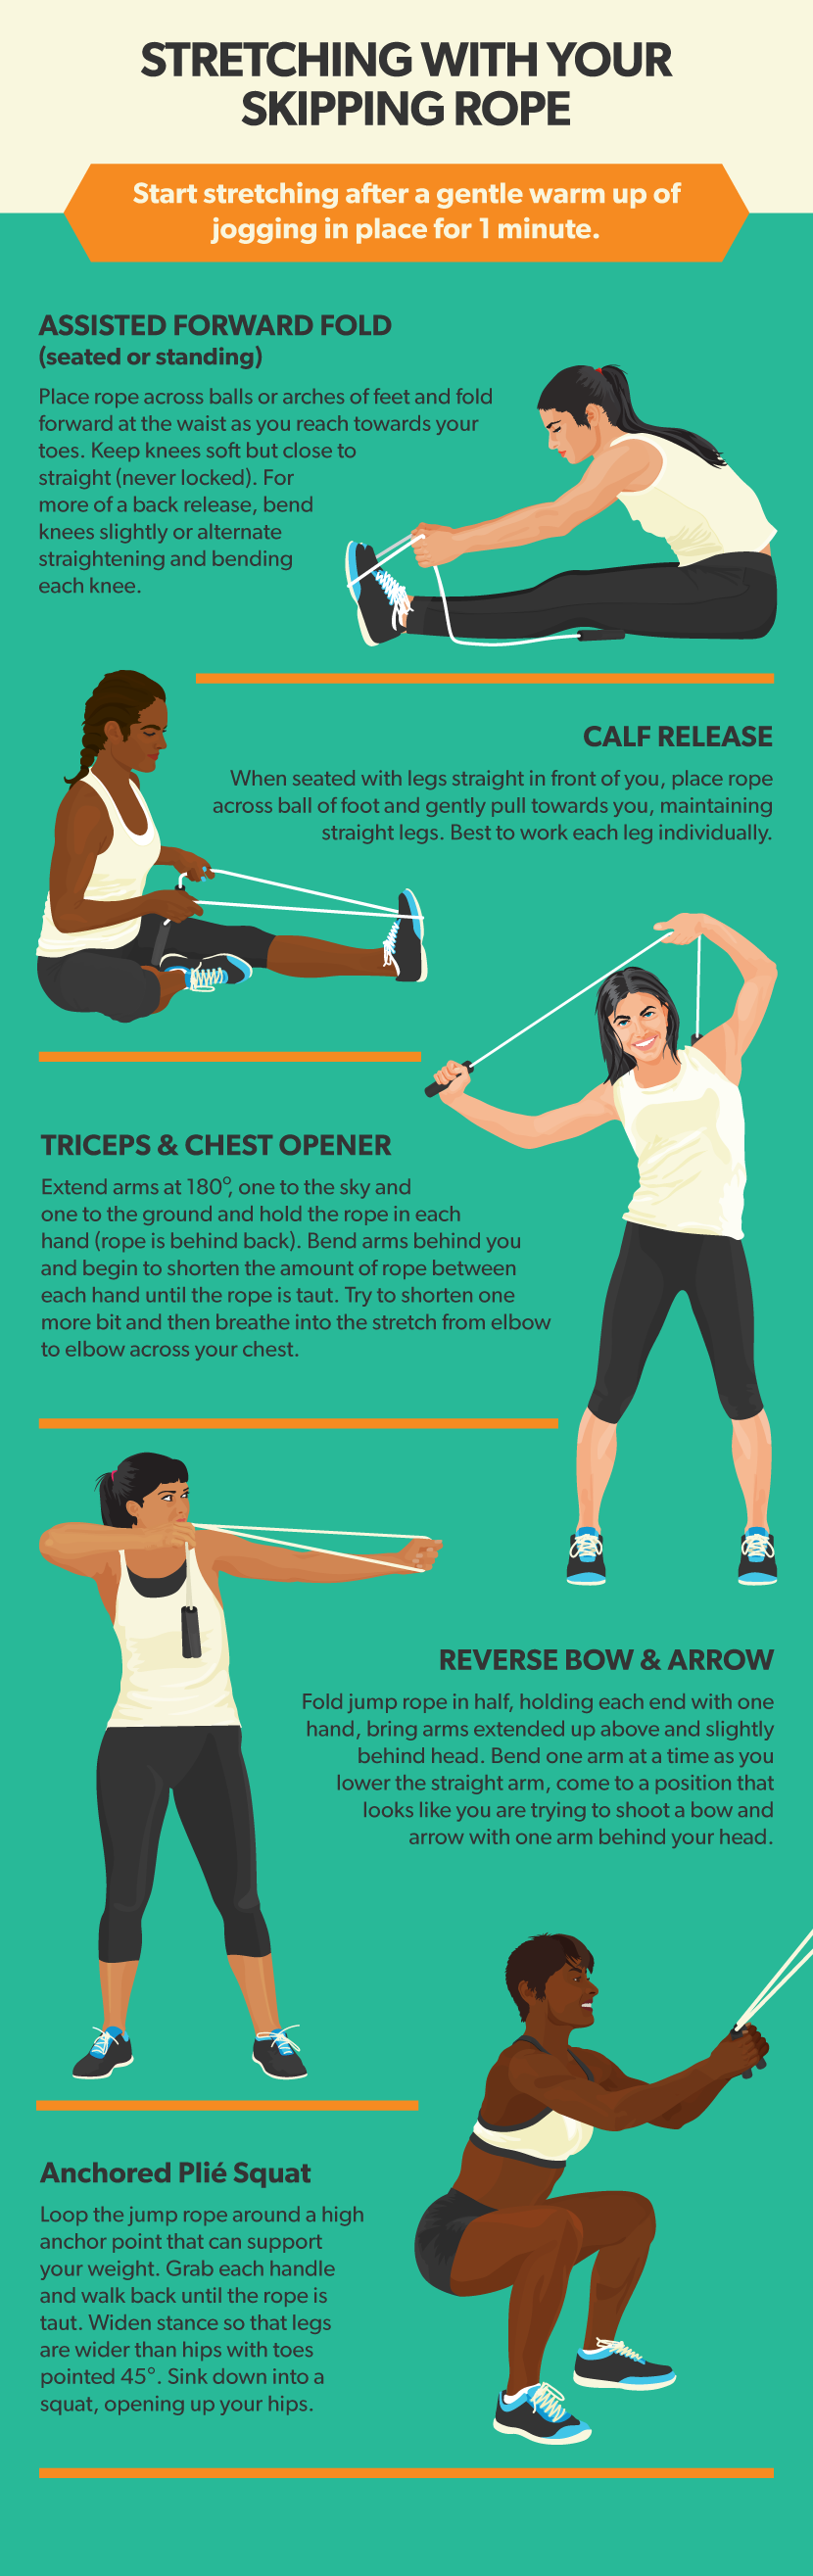 how to start skipping rope